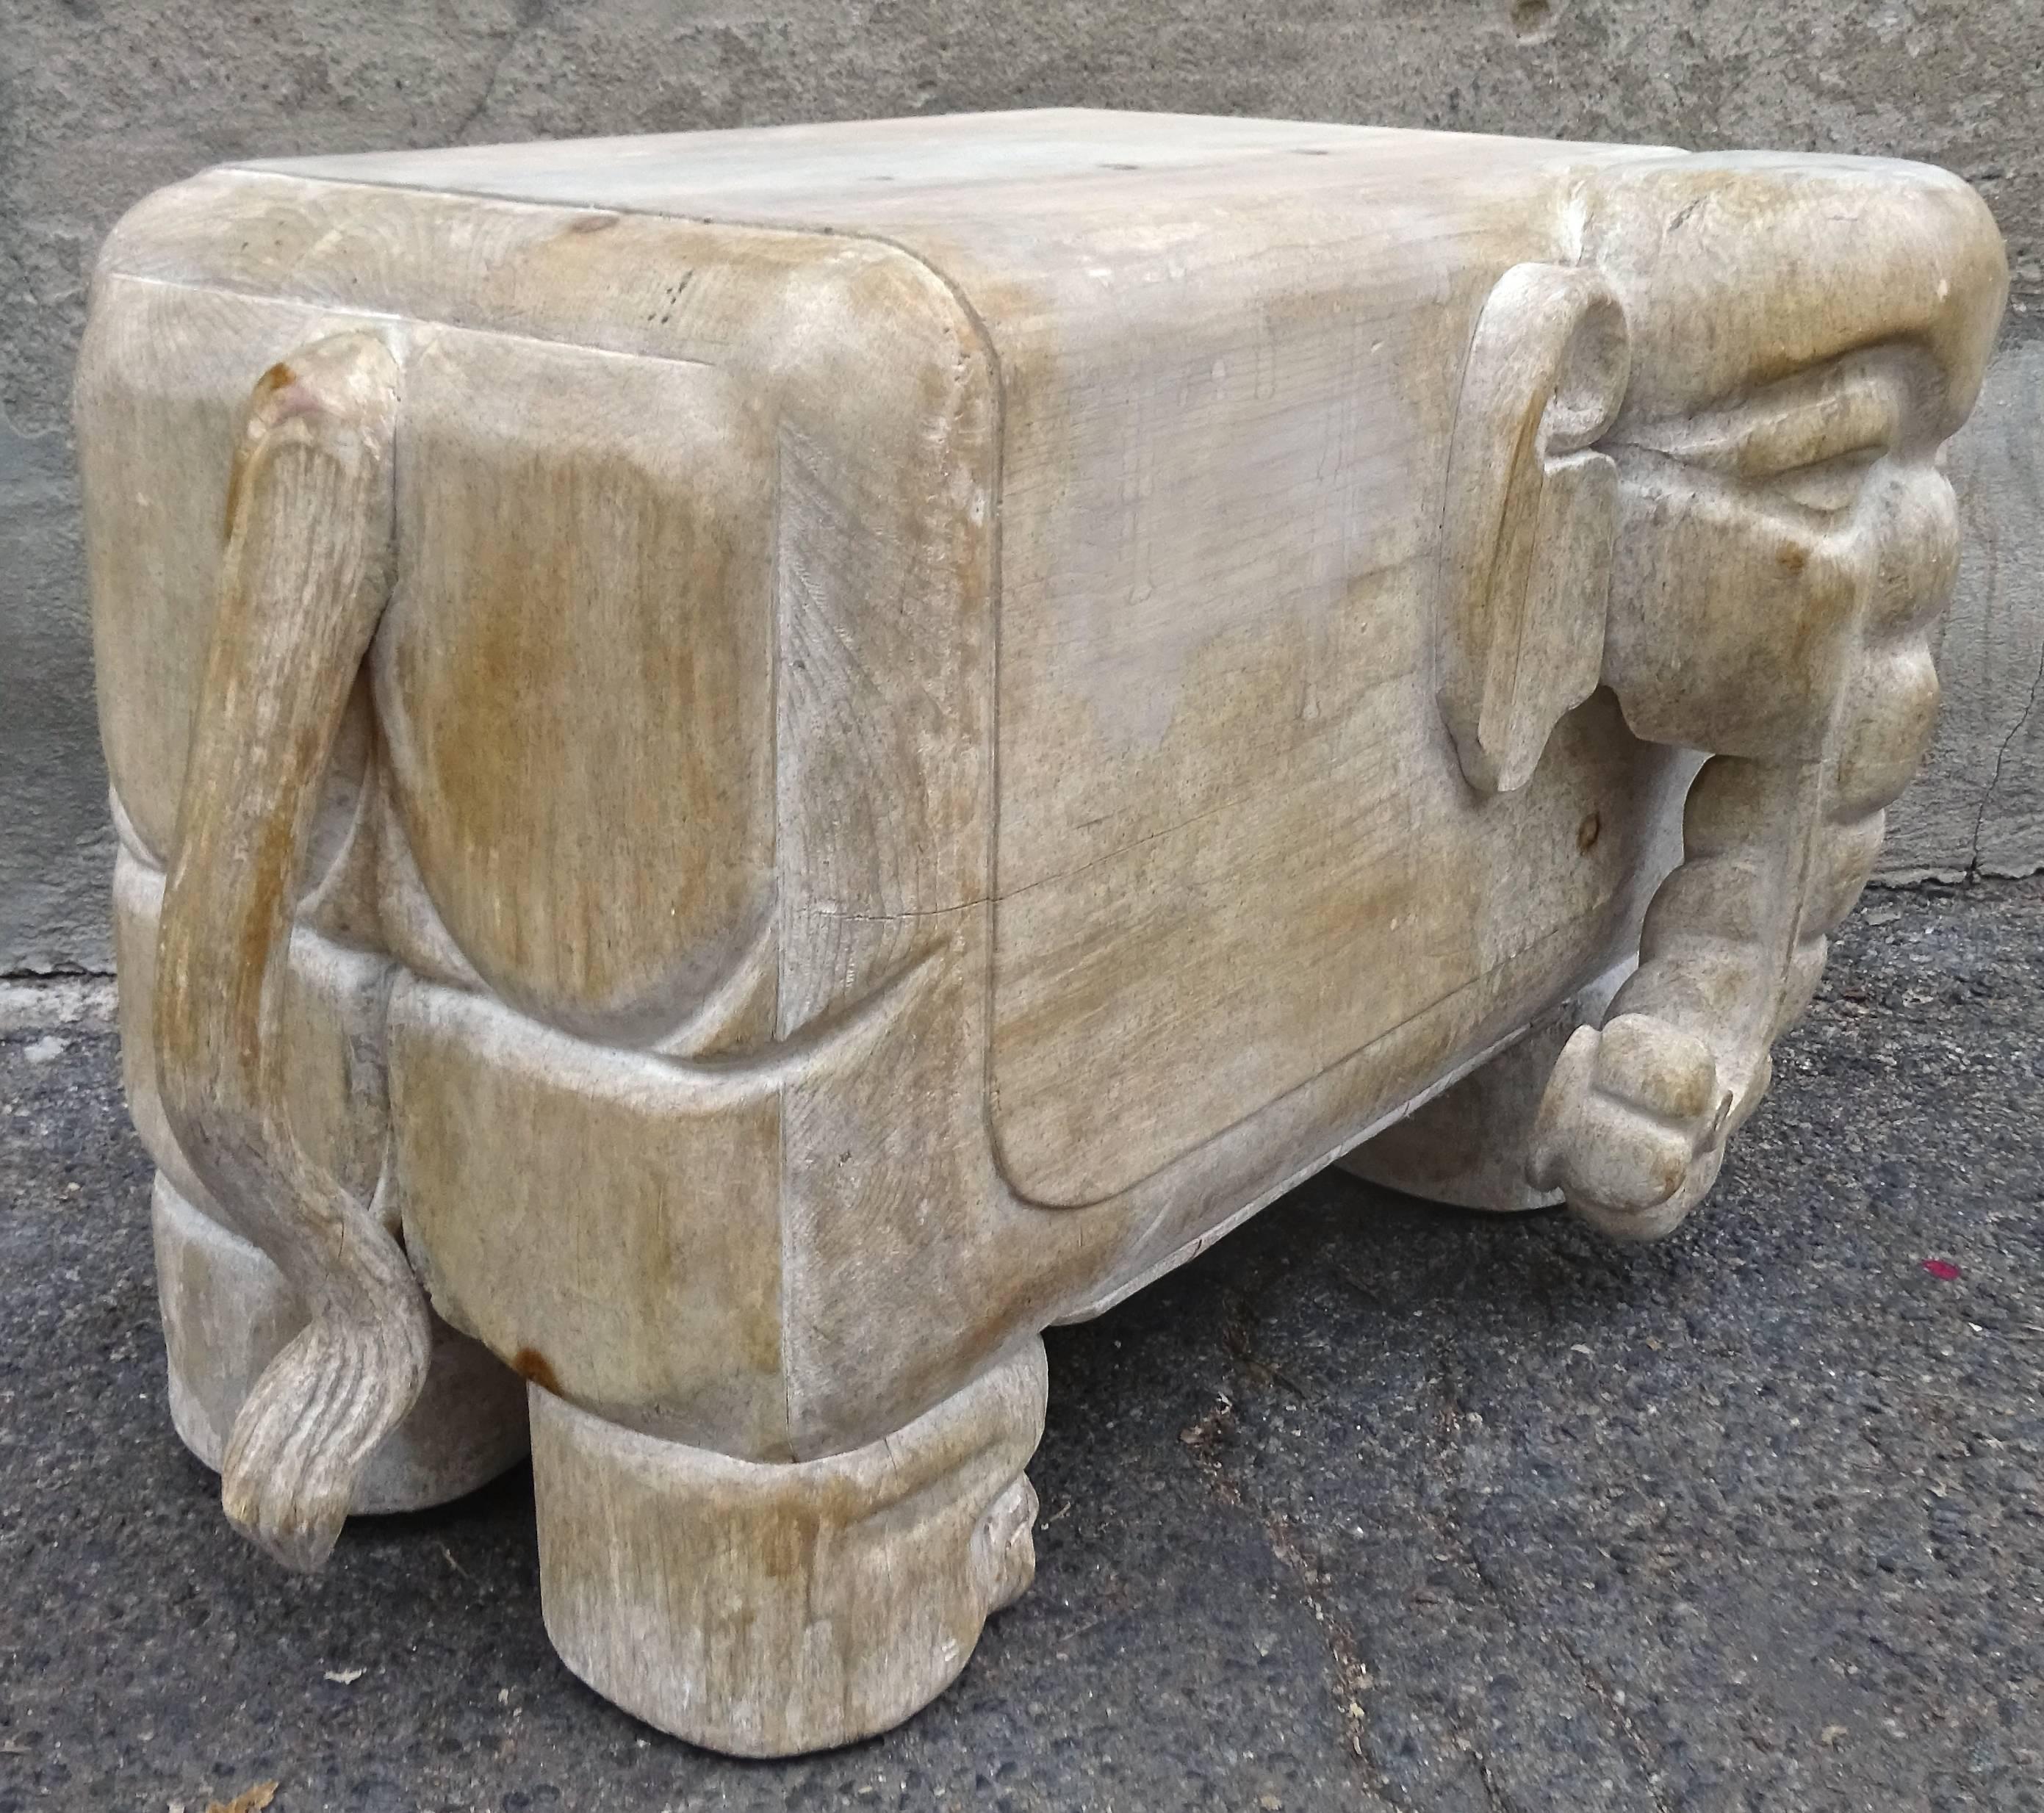 Sculptural 1970s Italian carved wood elephant table.